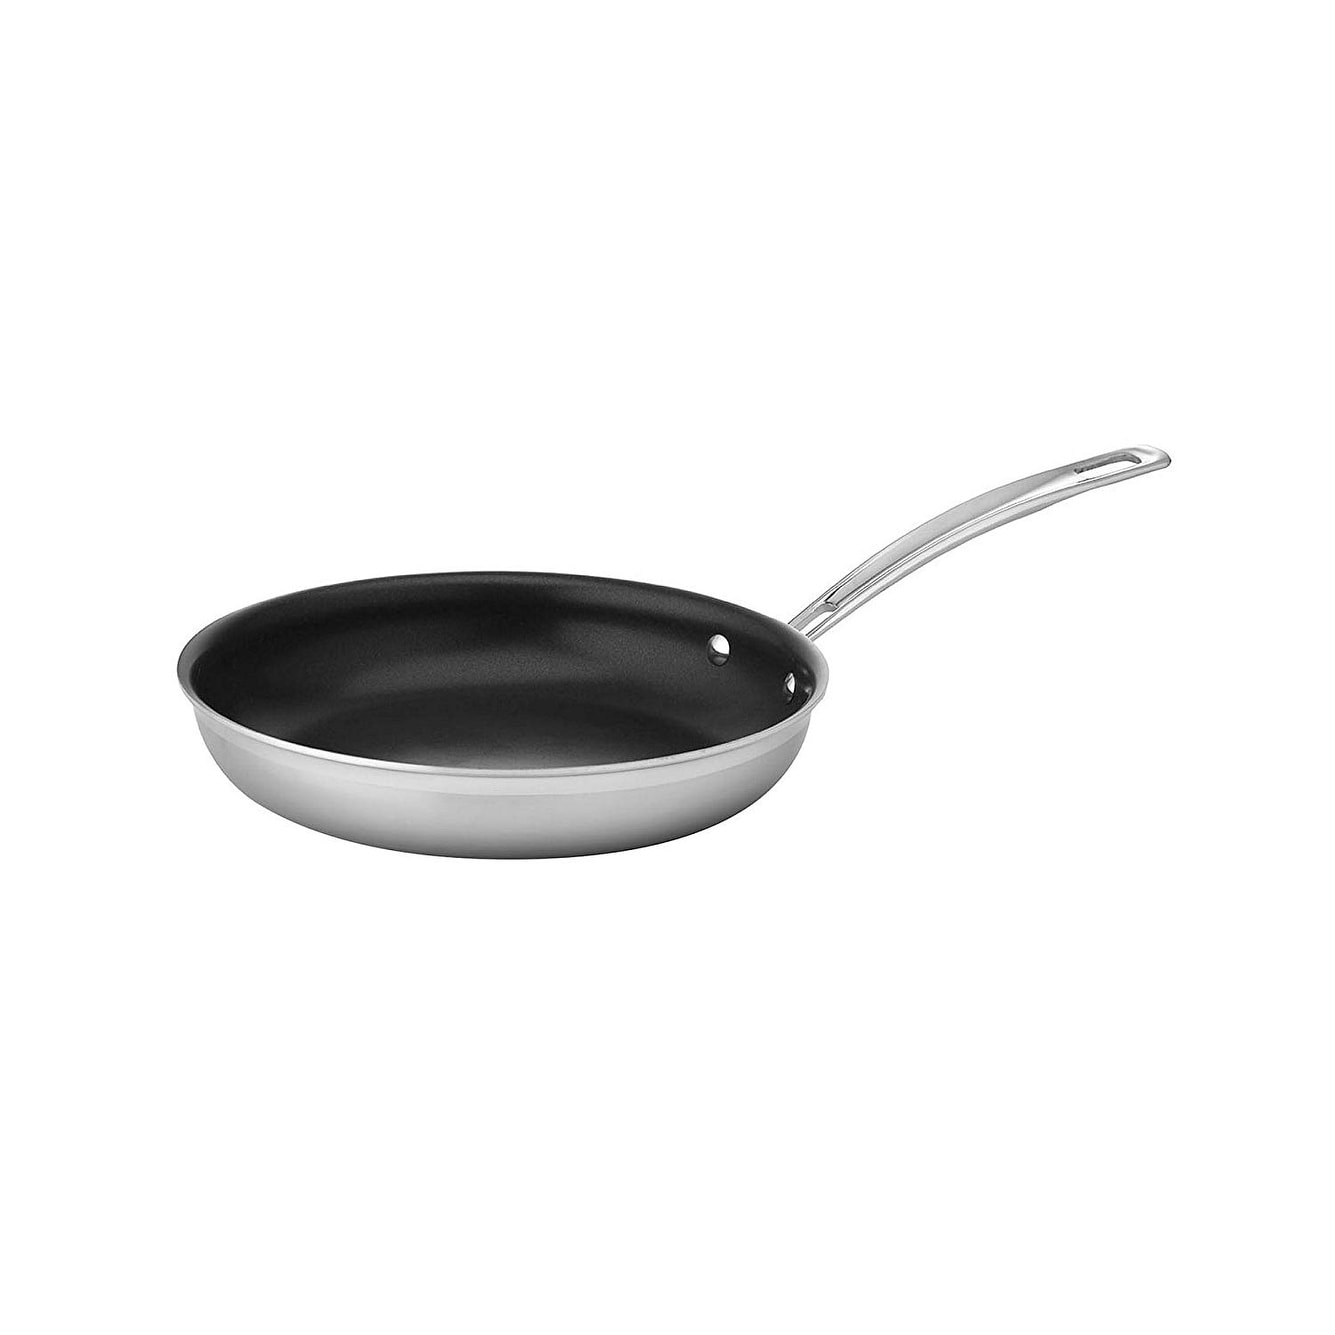 https://ak1.ostkcdn.com/images/products/is/images/direct/e2bb41cbb301593755af6a748c35cea5bb201cac/Cuisinart-MCP22-24NSN-MultiClad-Pro-Nonstick-Stainless-Steel-10-Inch-Skillet.jpg